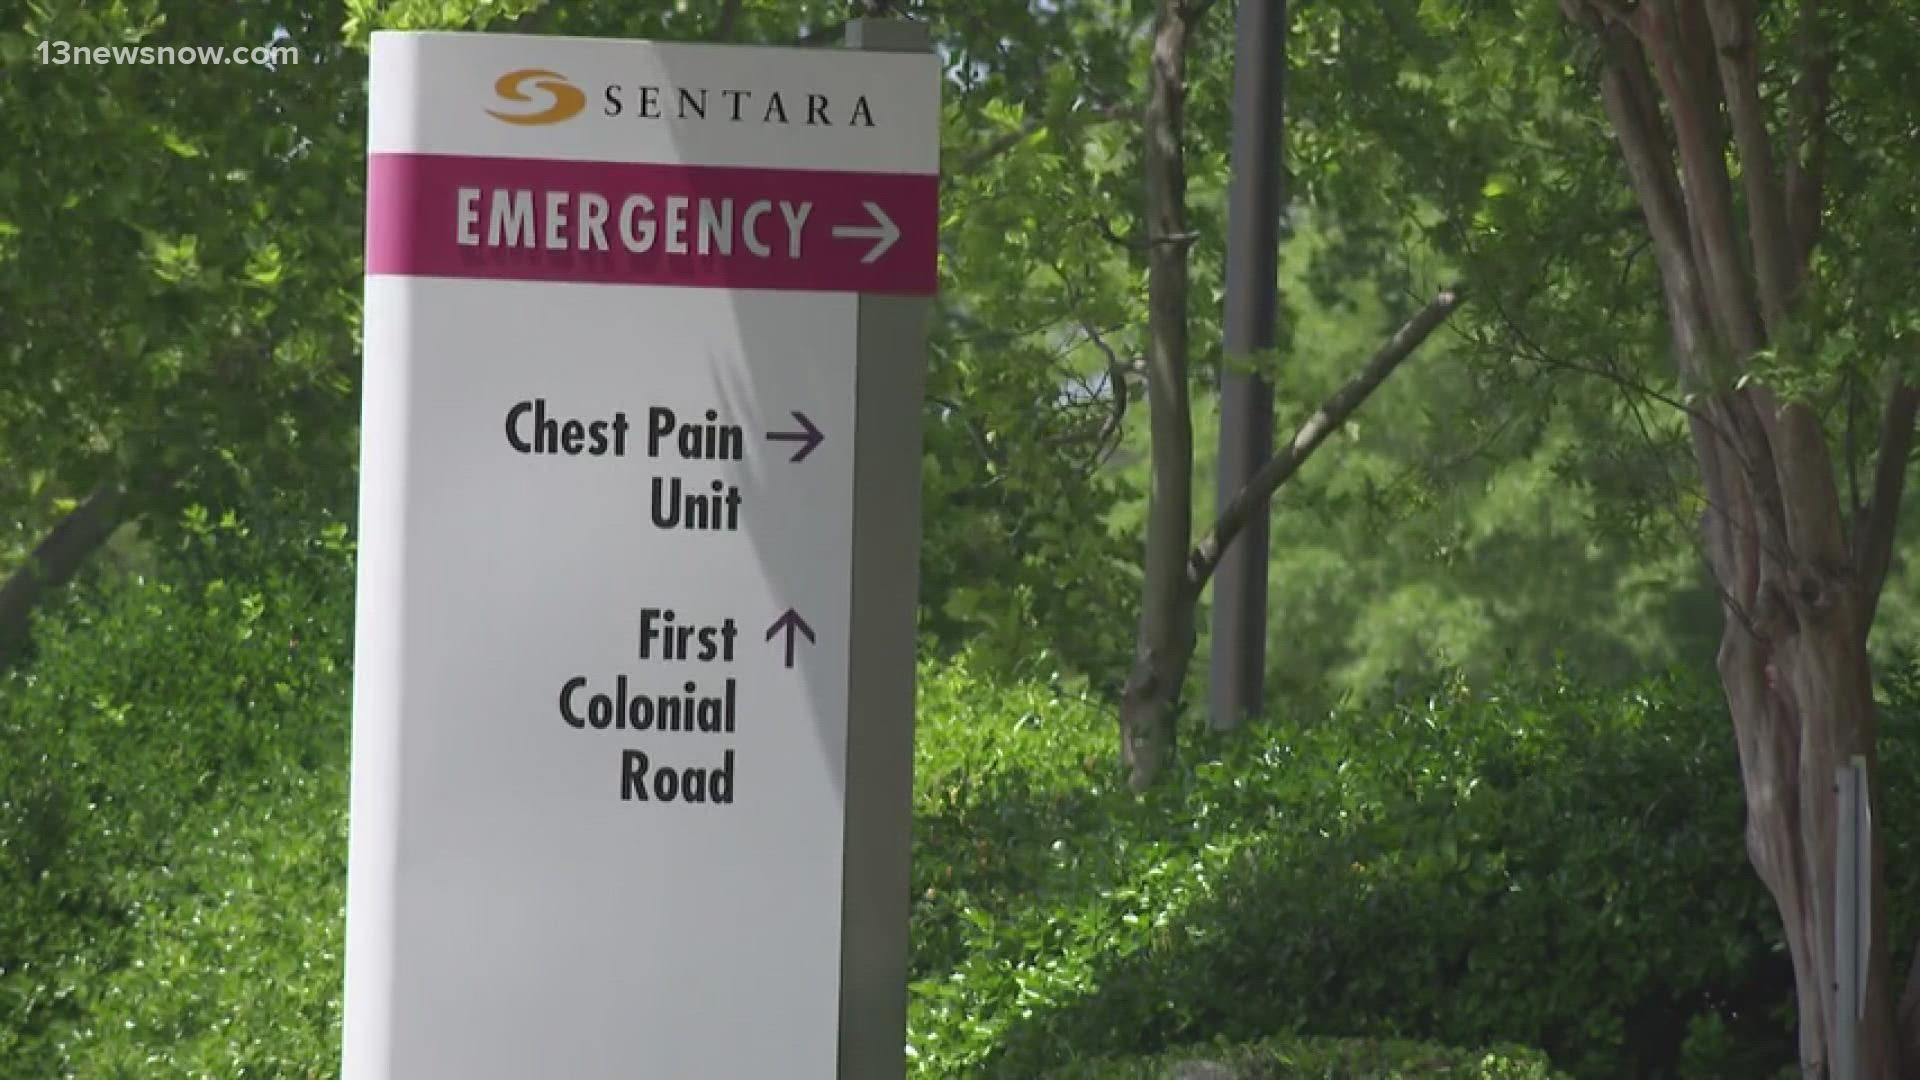 The shooting happened at Sentara Virginia Beach General Hospital. There was a struggle between police and someone who was in custody.